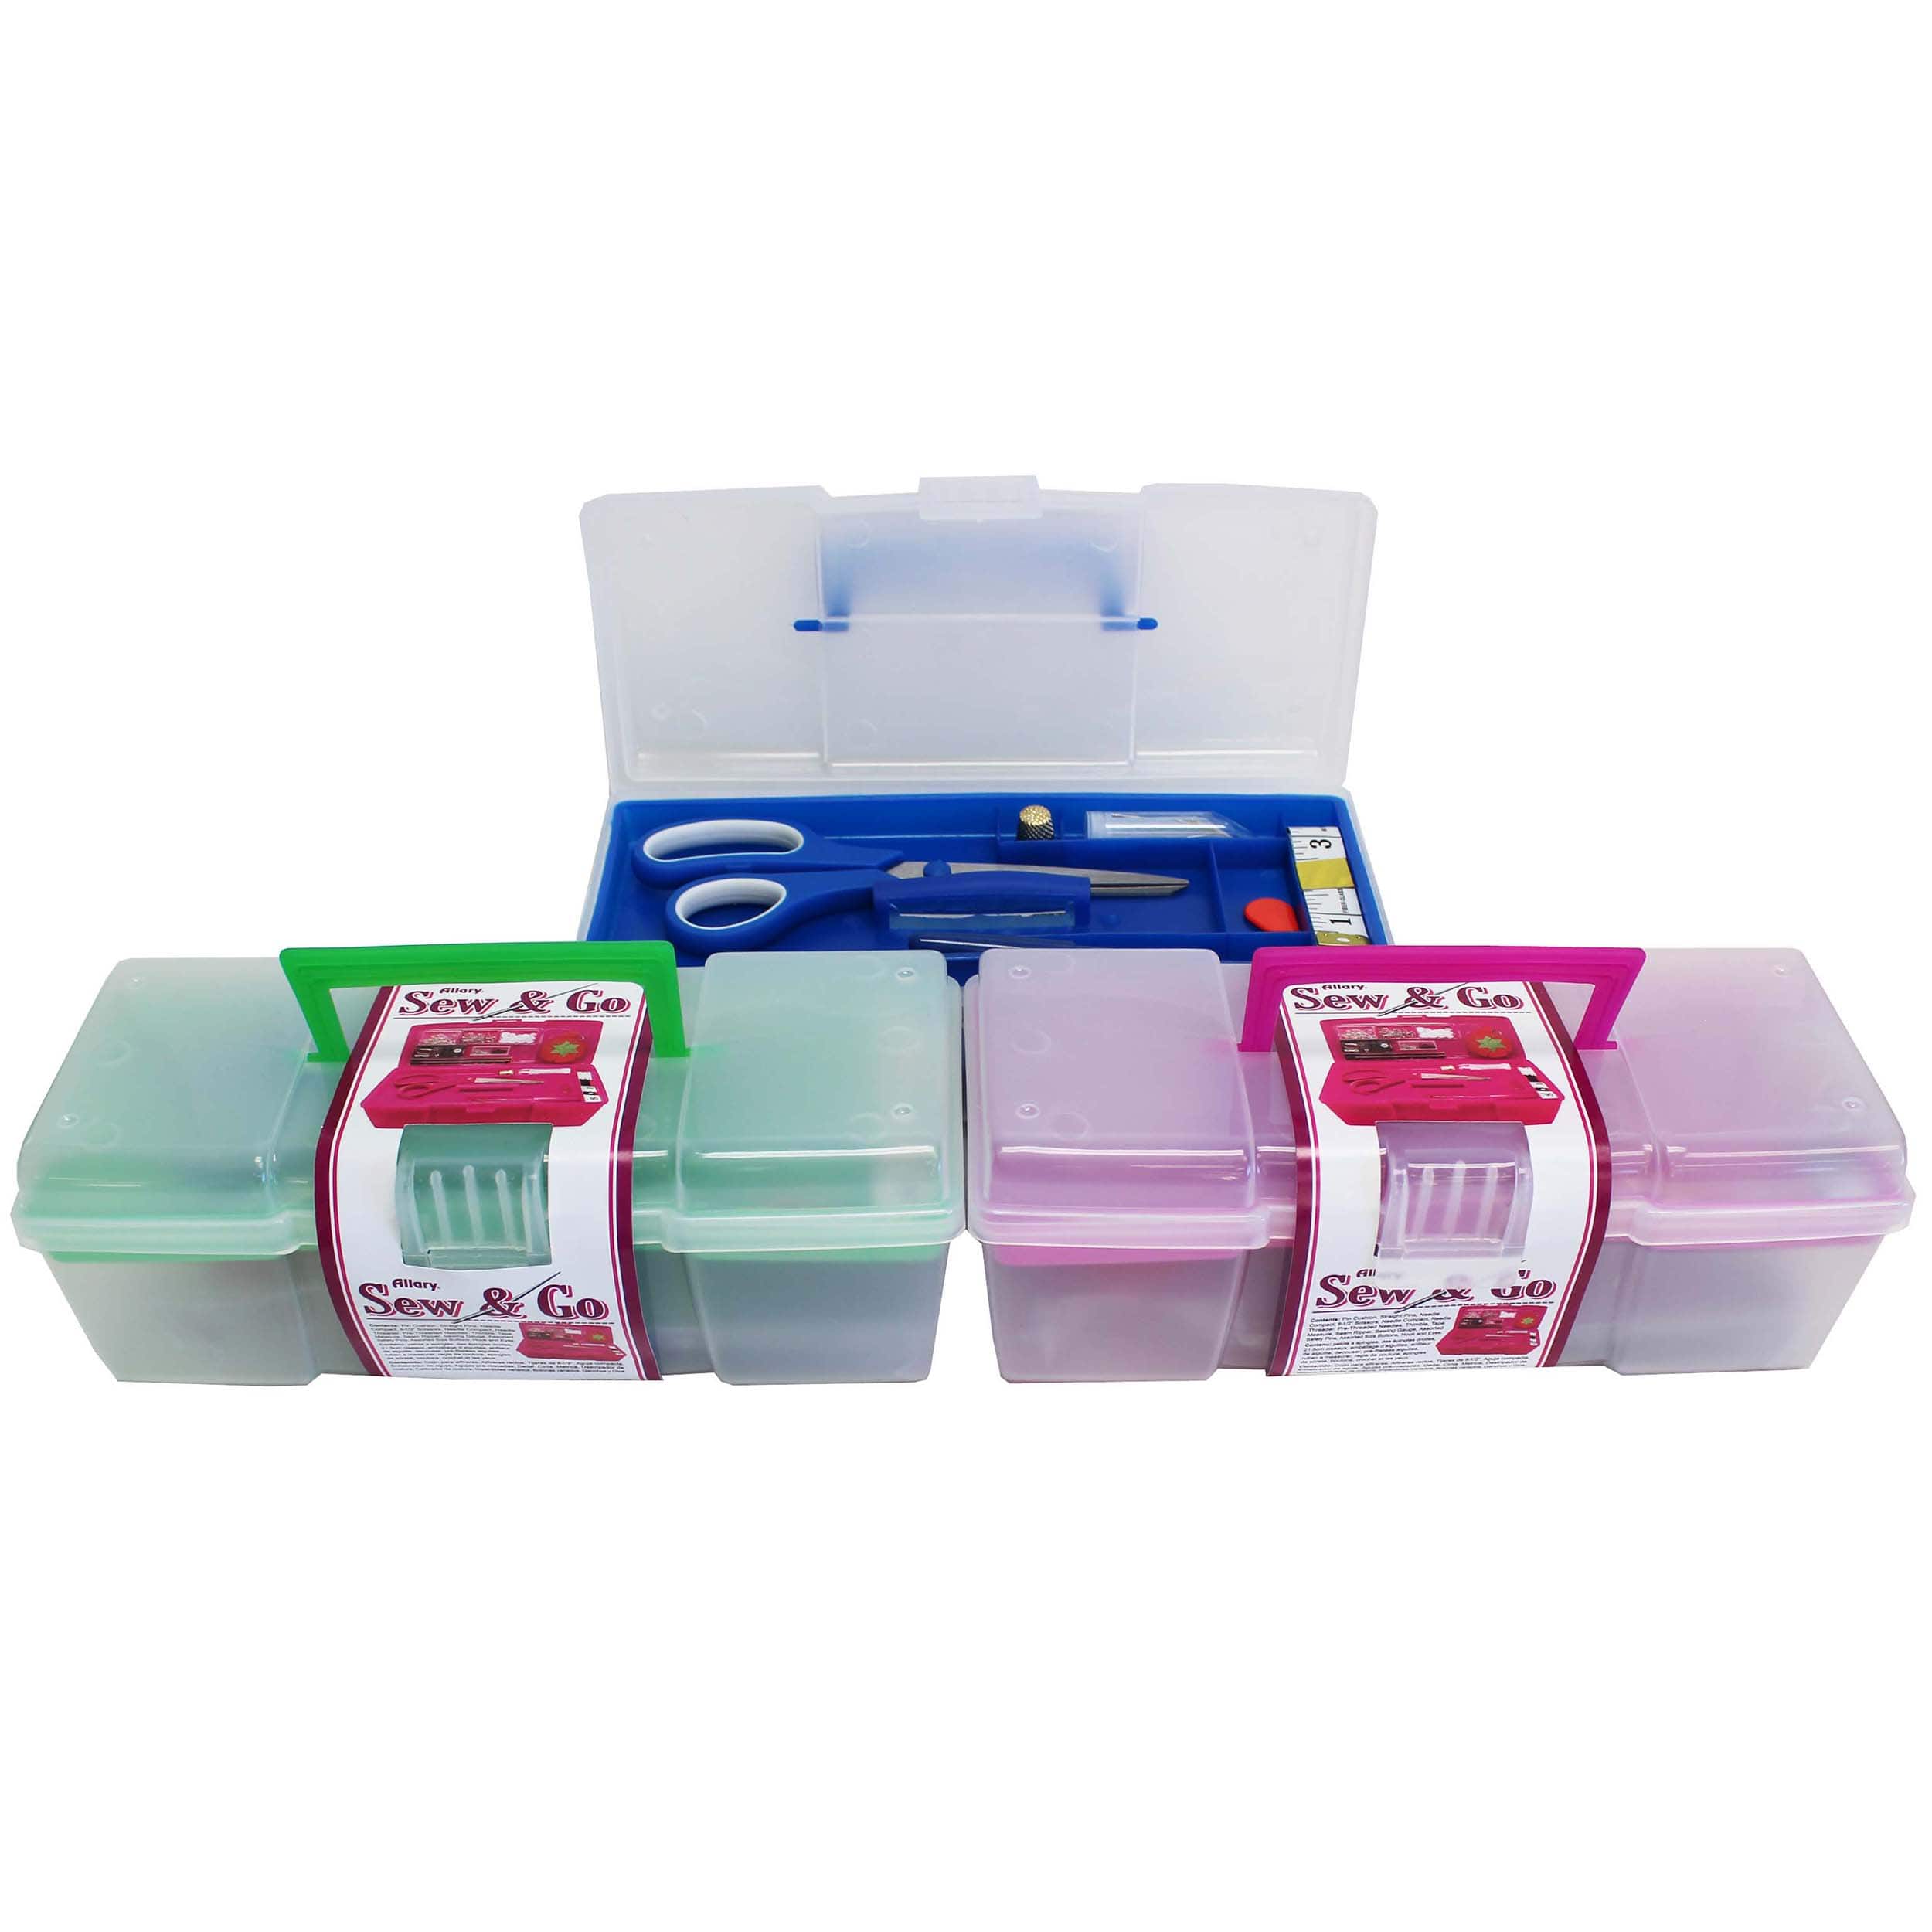 Storage pro tip - this double sided sewing box from Michaels